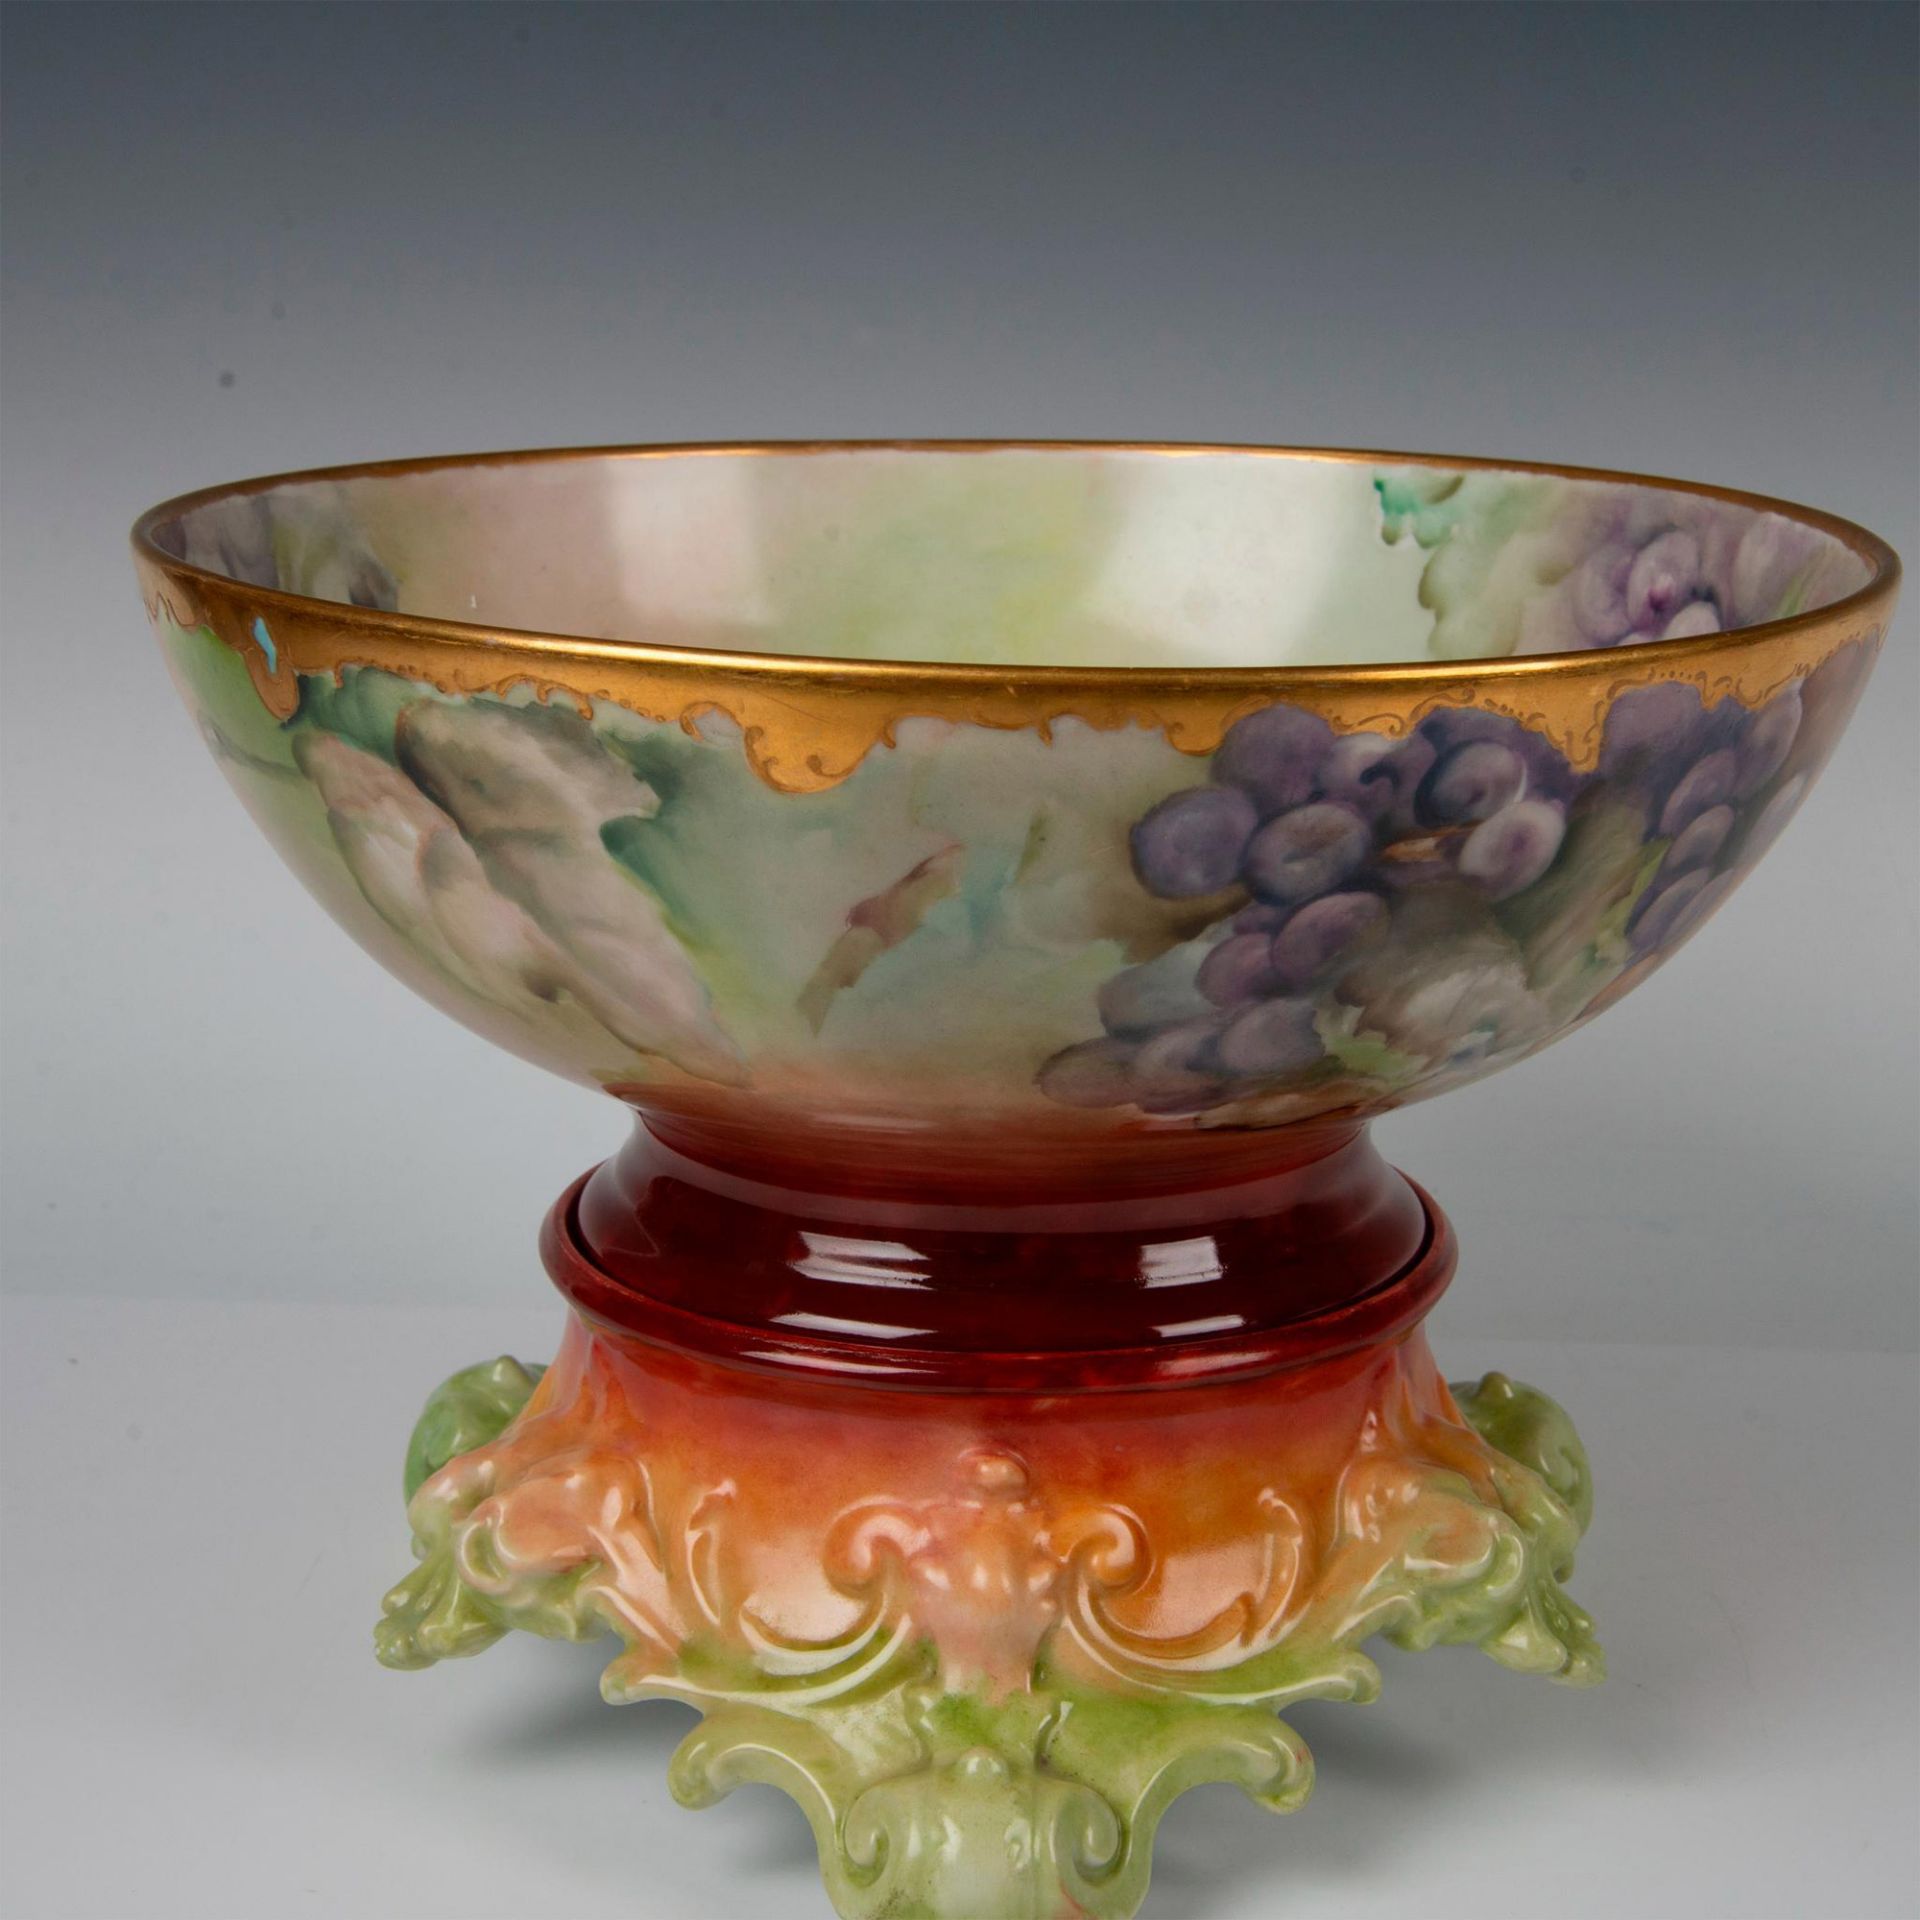 2pc Tressemanes & Vogt Limoges Hand Painted Punch Bowl with Stand - Image 4 of 8